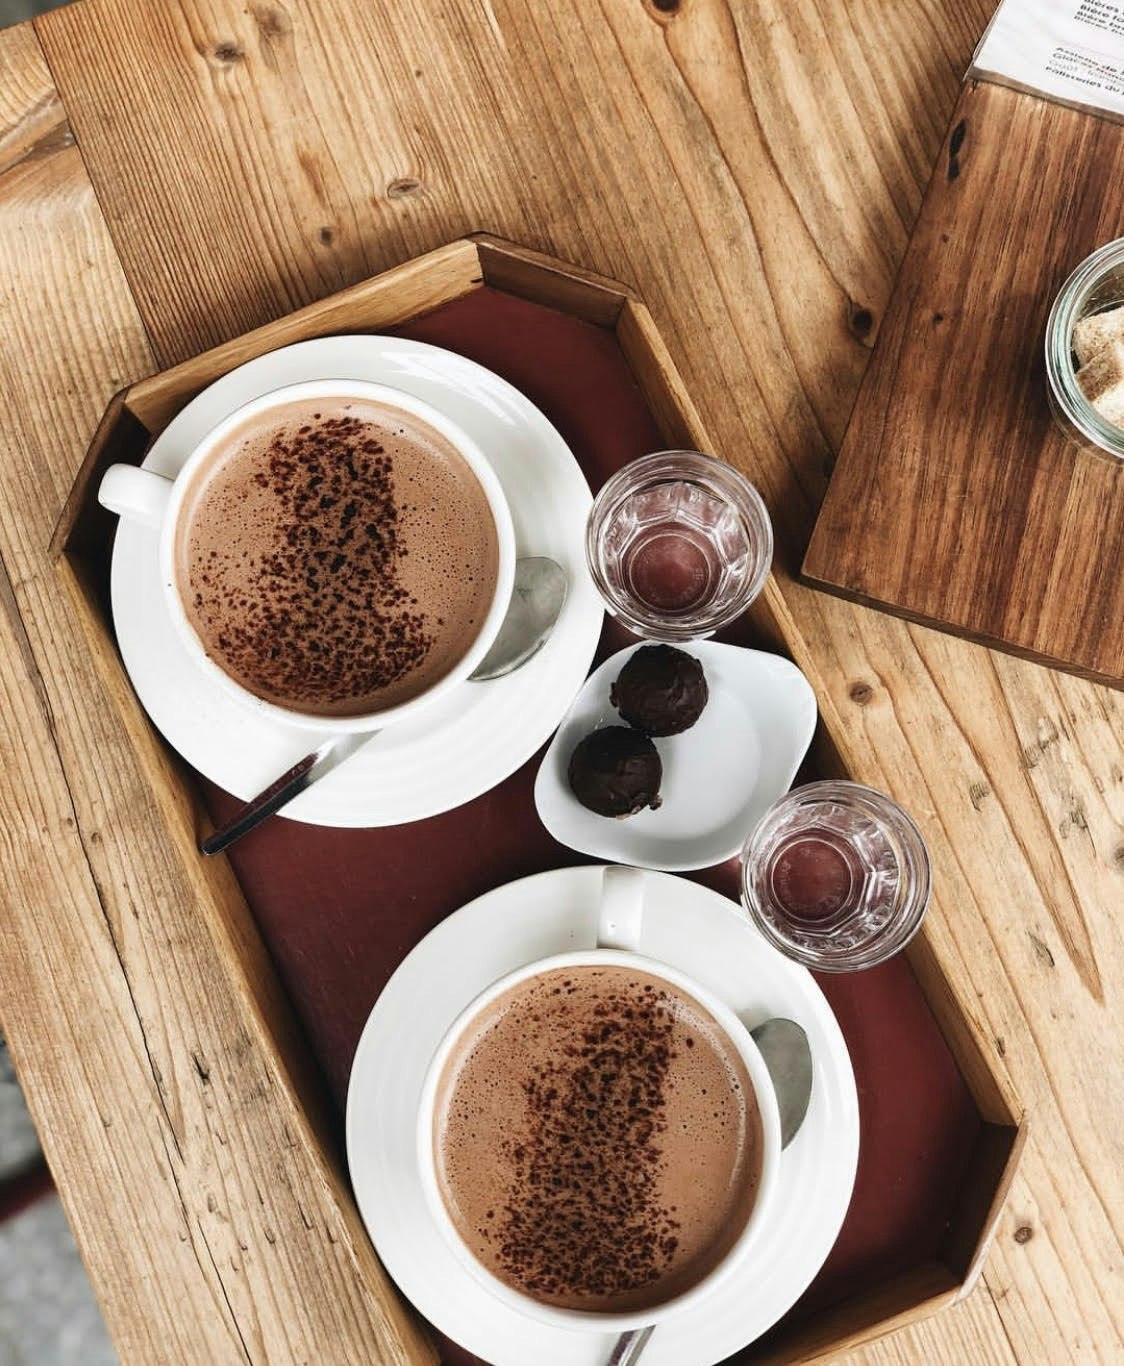 Plain white mugs of hot chocolate sprinkled with spices and more chocolate on wooden trays arranged on warm wood tables with knots and wood grain visible.